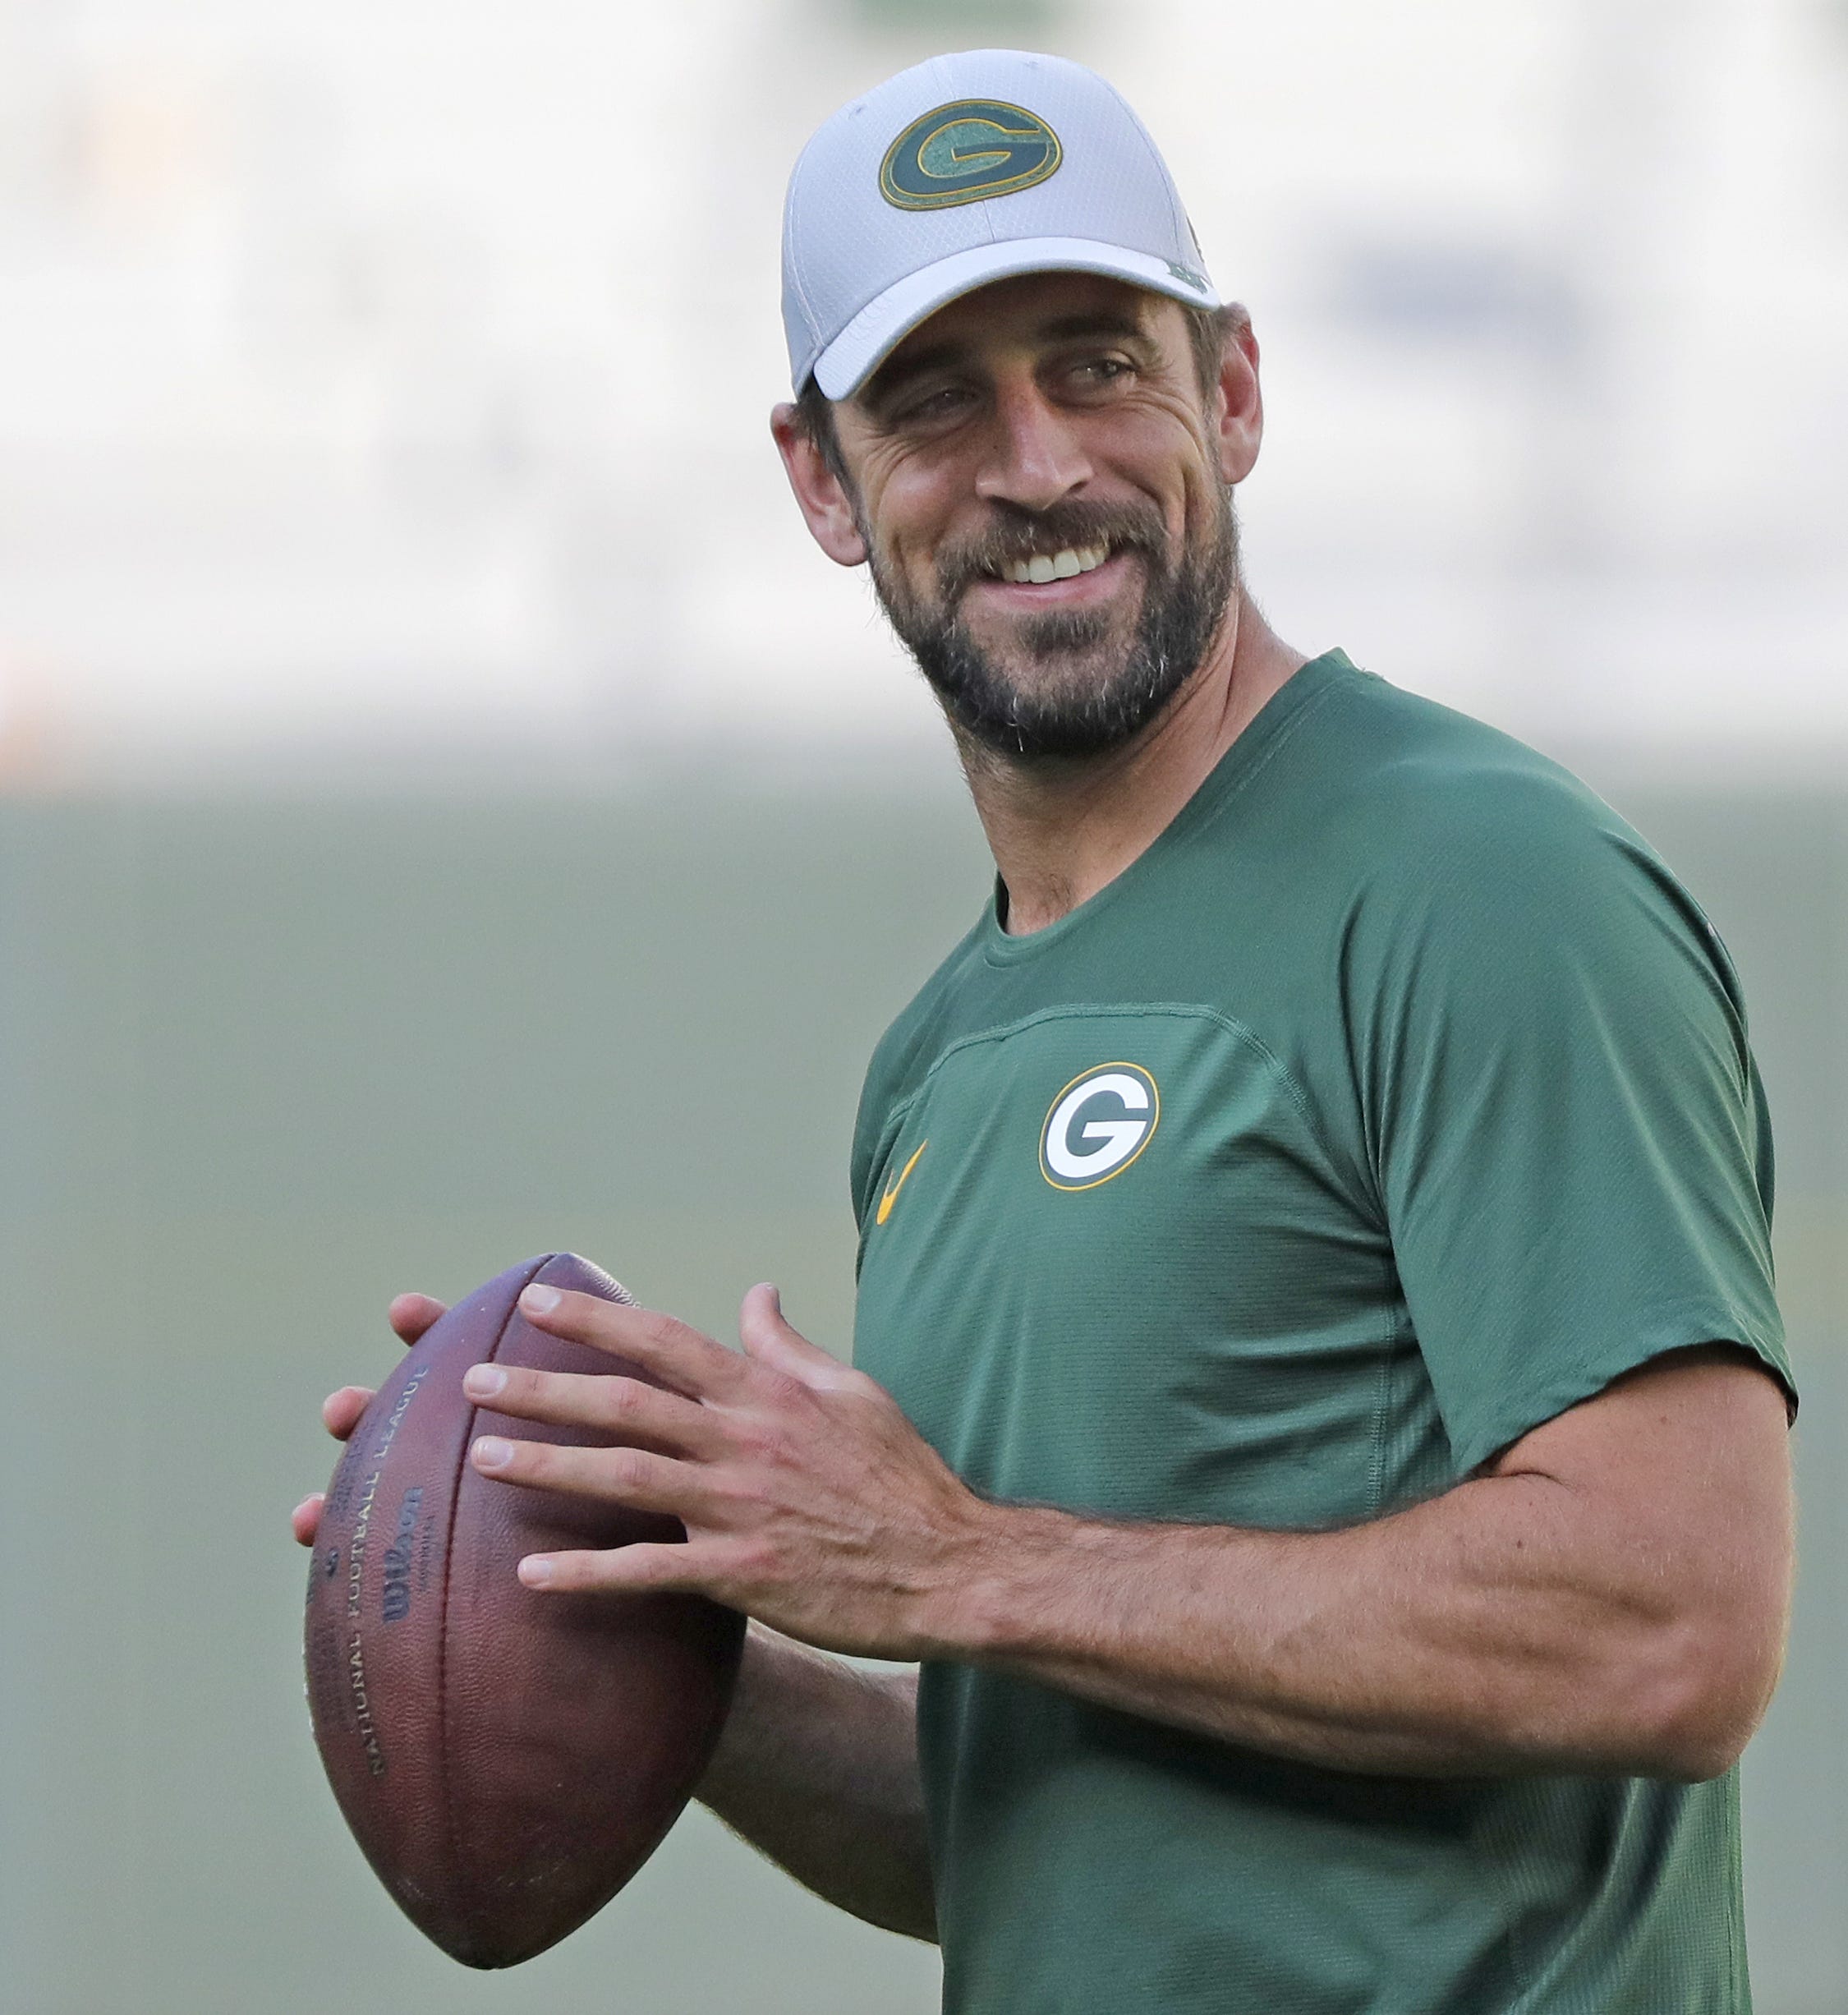 Green Bay Packers quarterback Aaron Rodgers (12) warms up before a NFL preseason game at Lambeau Field on Thursday, August 9, 2018 in Green Bay, Wis.